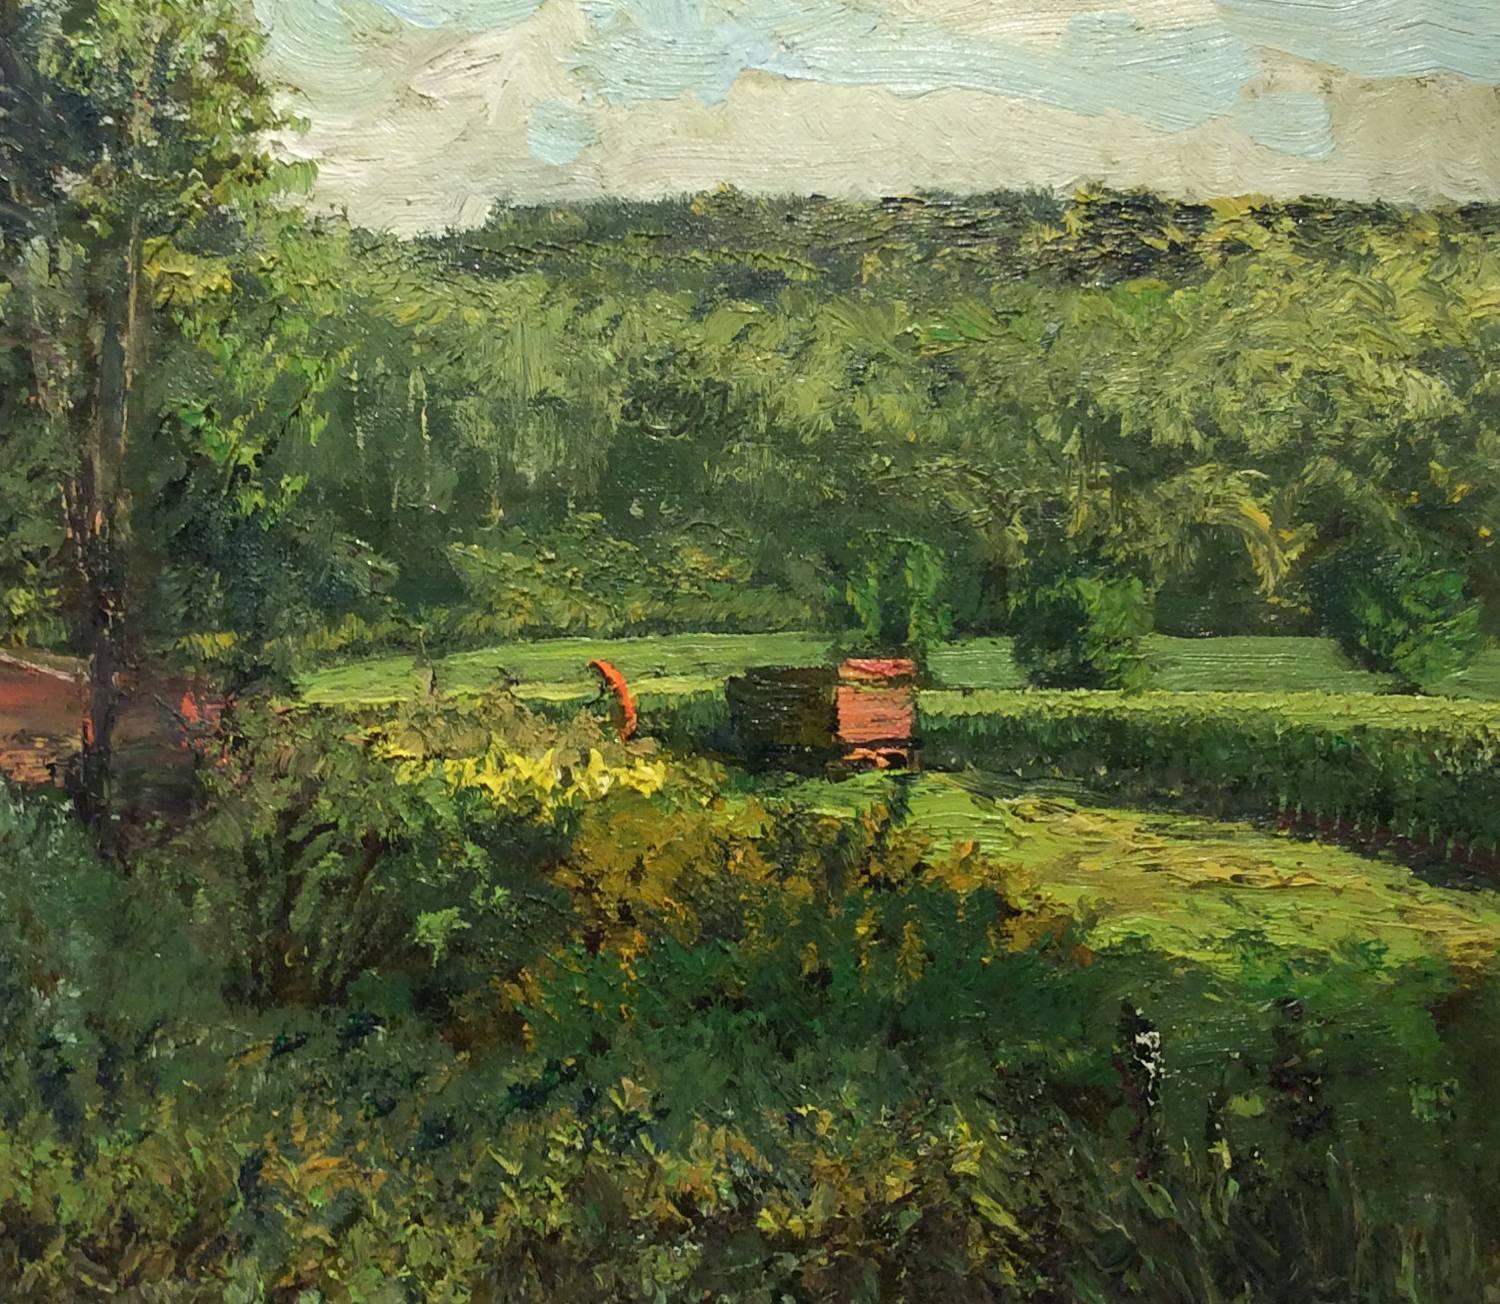 Harry Orlyk Landscape Painting - #5510 Red Wagon: Impressionist Landscape Oil Painting of Green Country Field